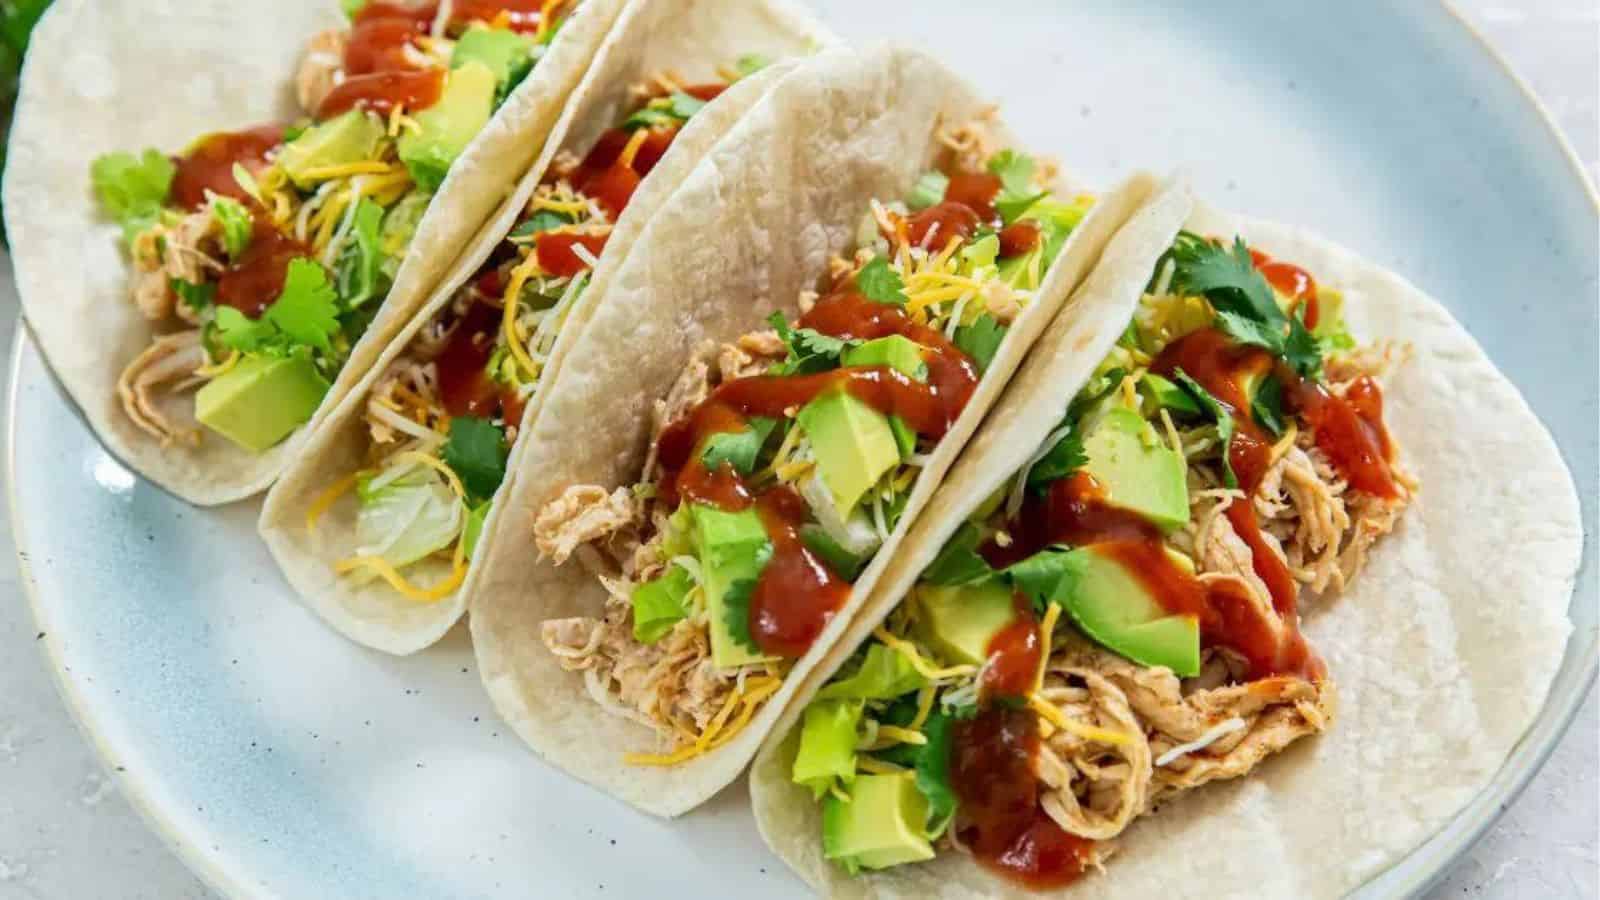 Air Fryer Chicken Tacos on a light blue plate with cheese, avocados, cilantro, and red sauce.